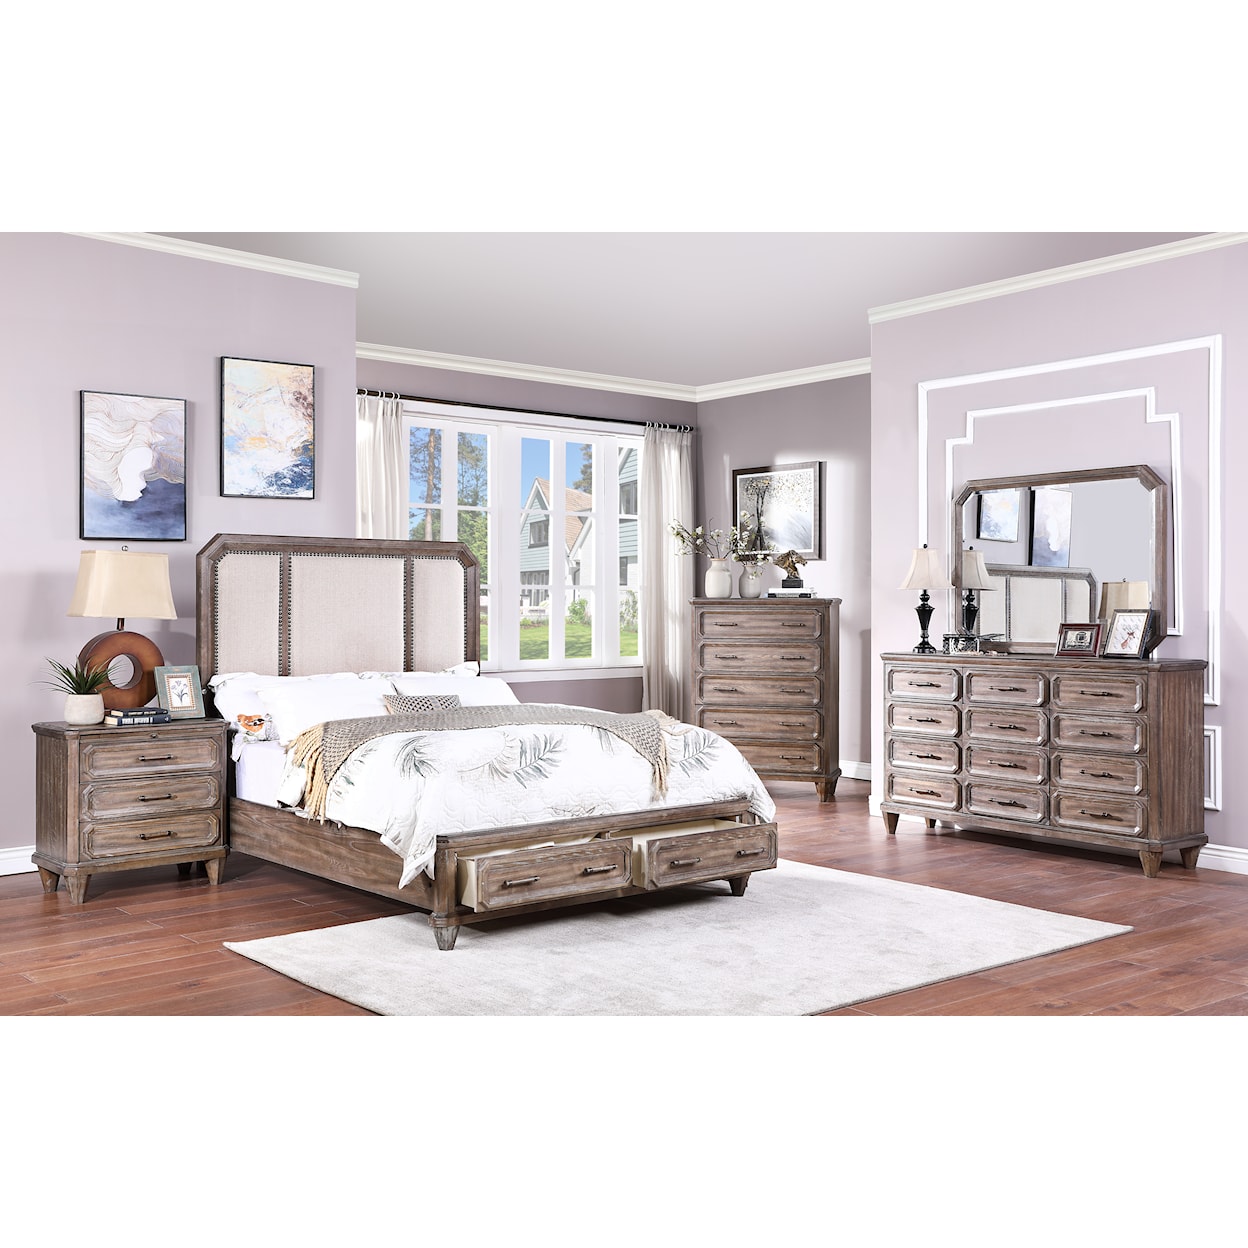 New Classic Furniture Lincoln Park California King Storage Bed 